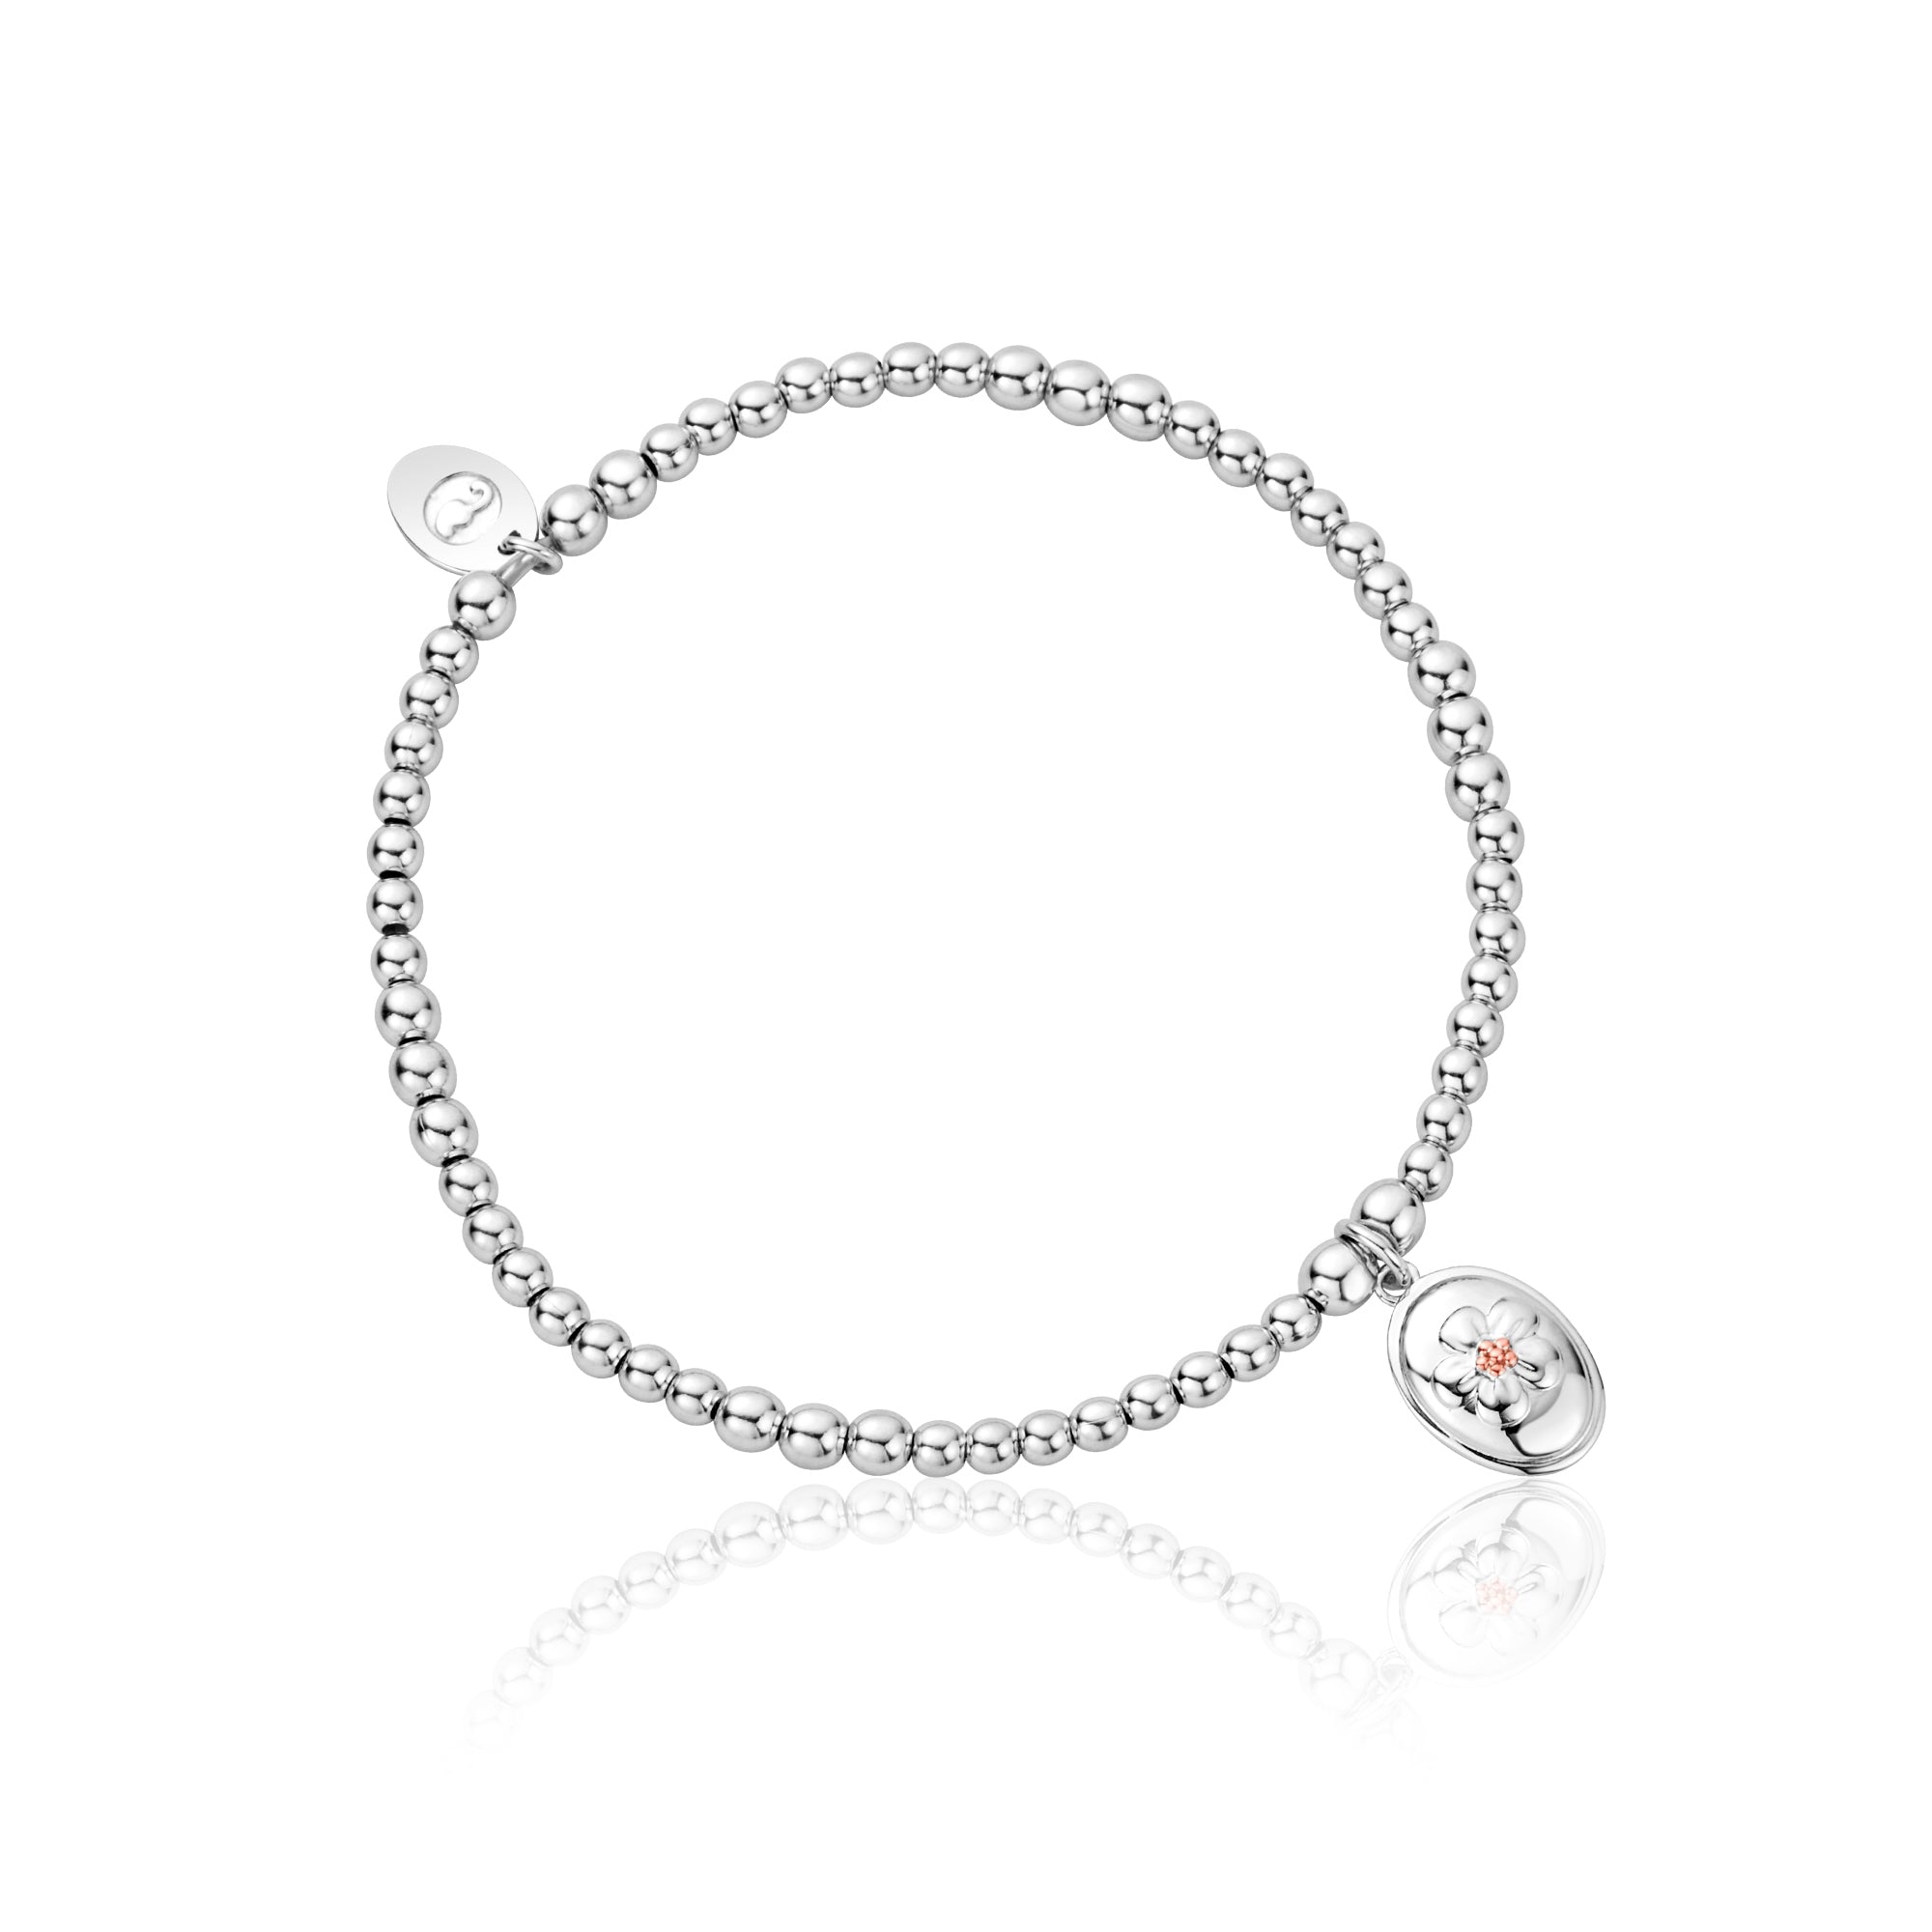 Clogau Gold silver and rose gold beaded bracelet with forget me not flower charm Carathea jewellers